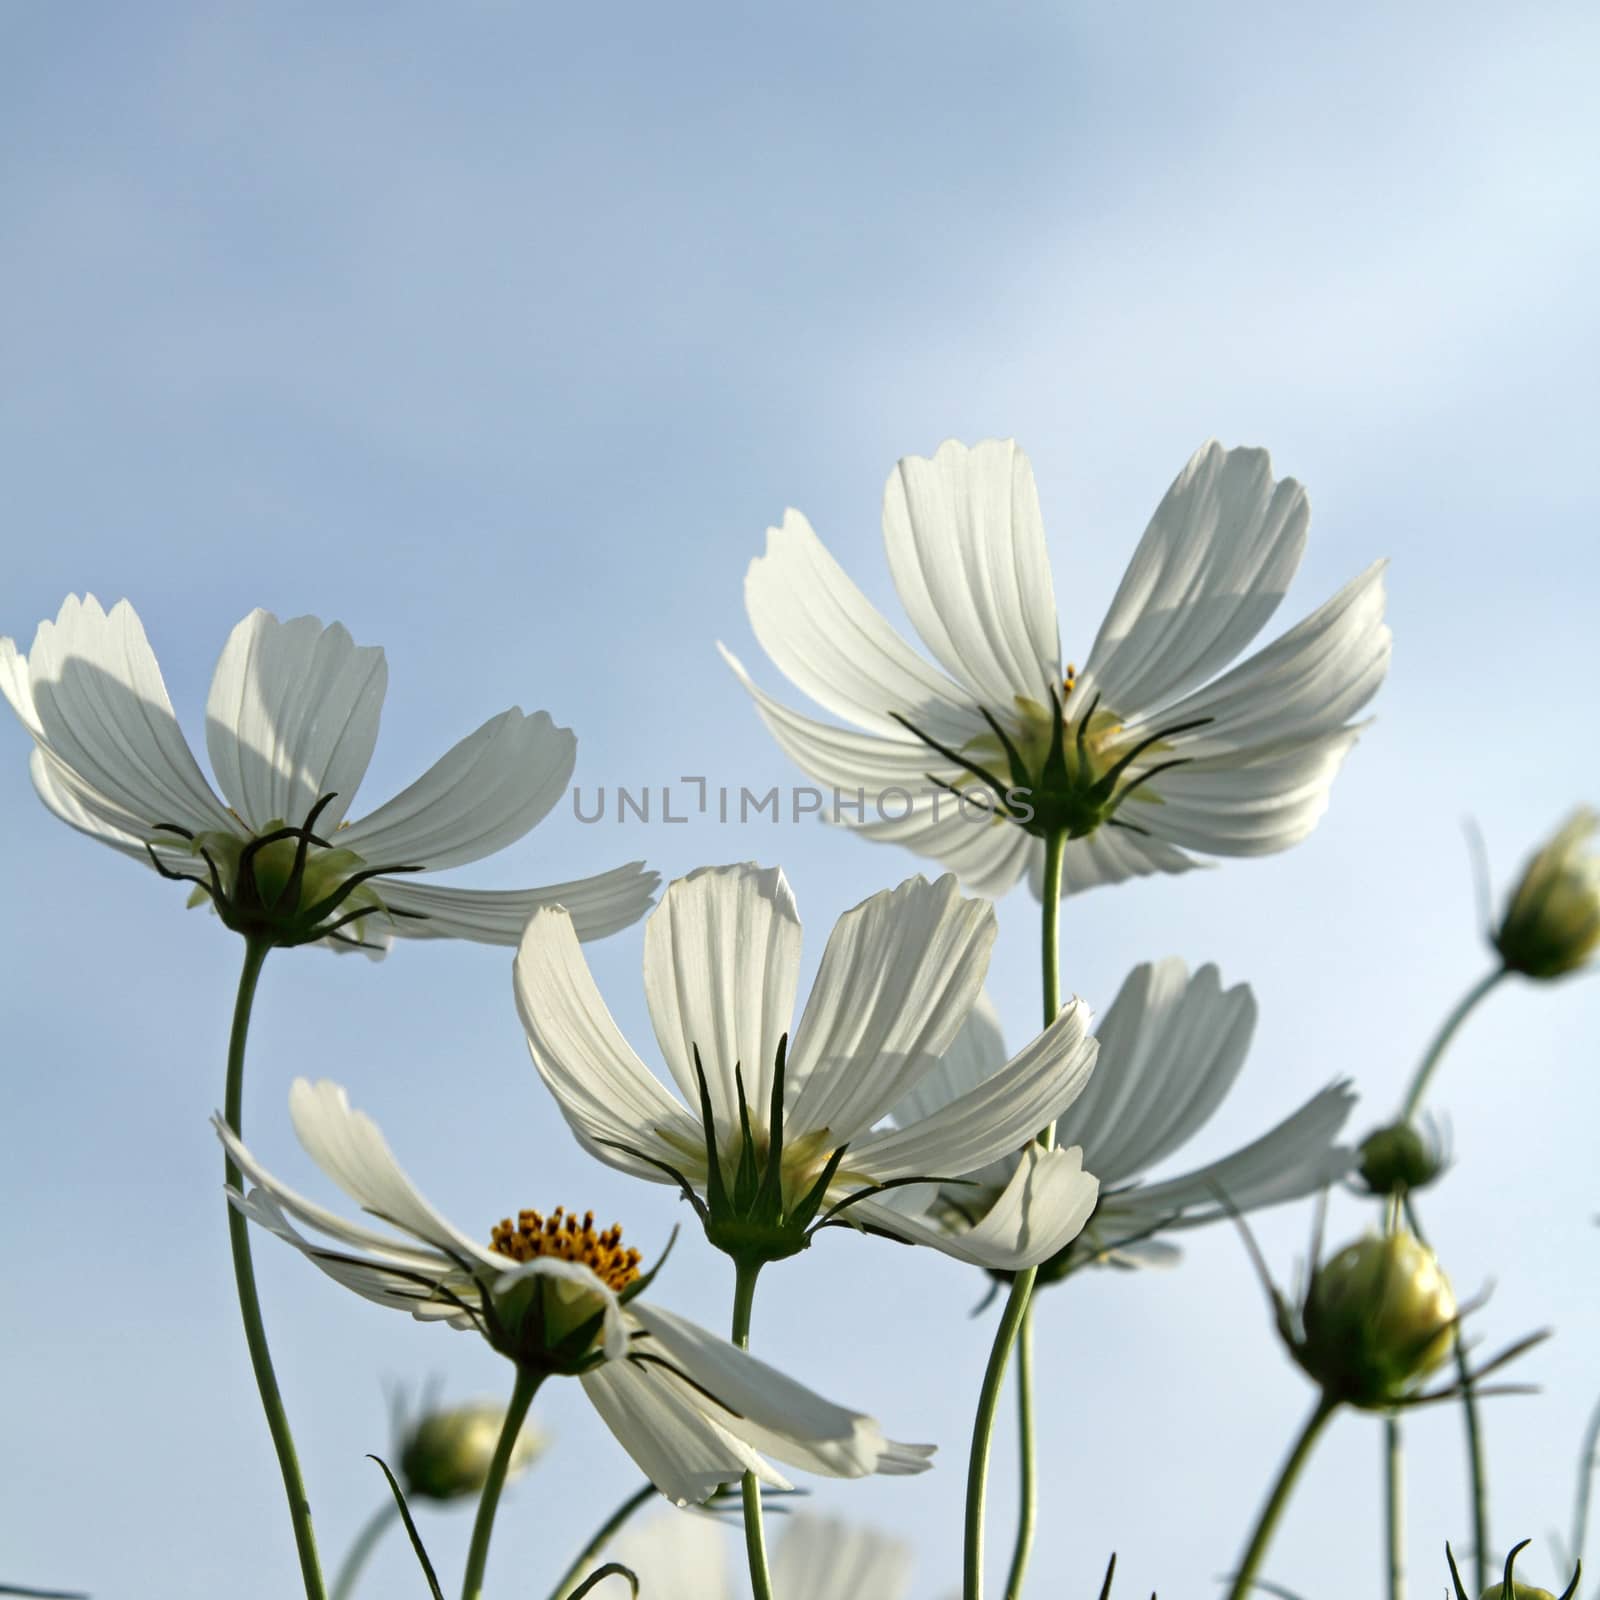 Close up white cosmos flowers in the garden